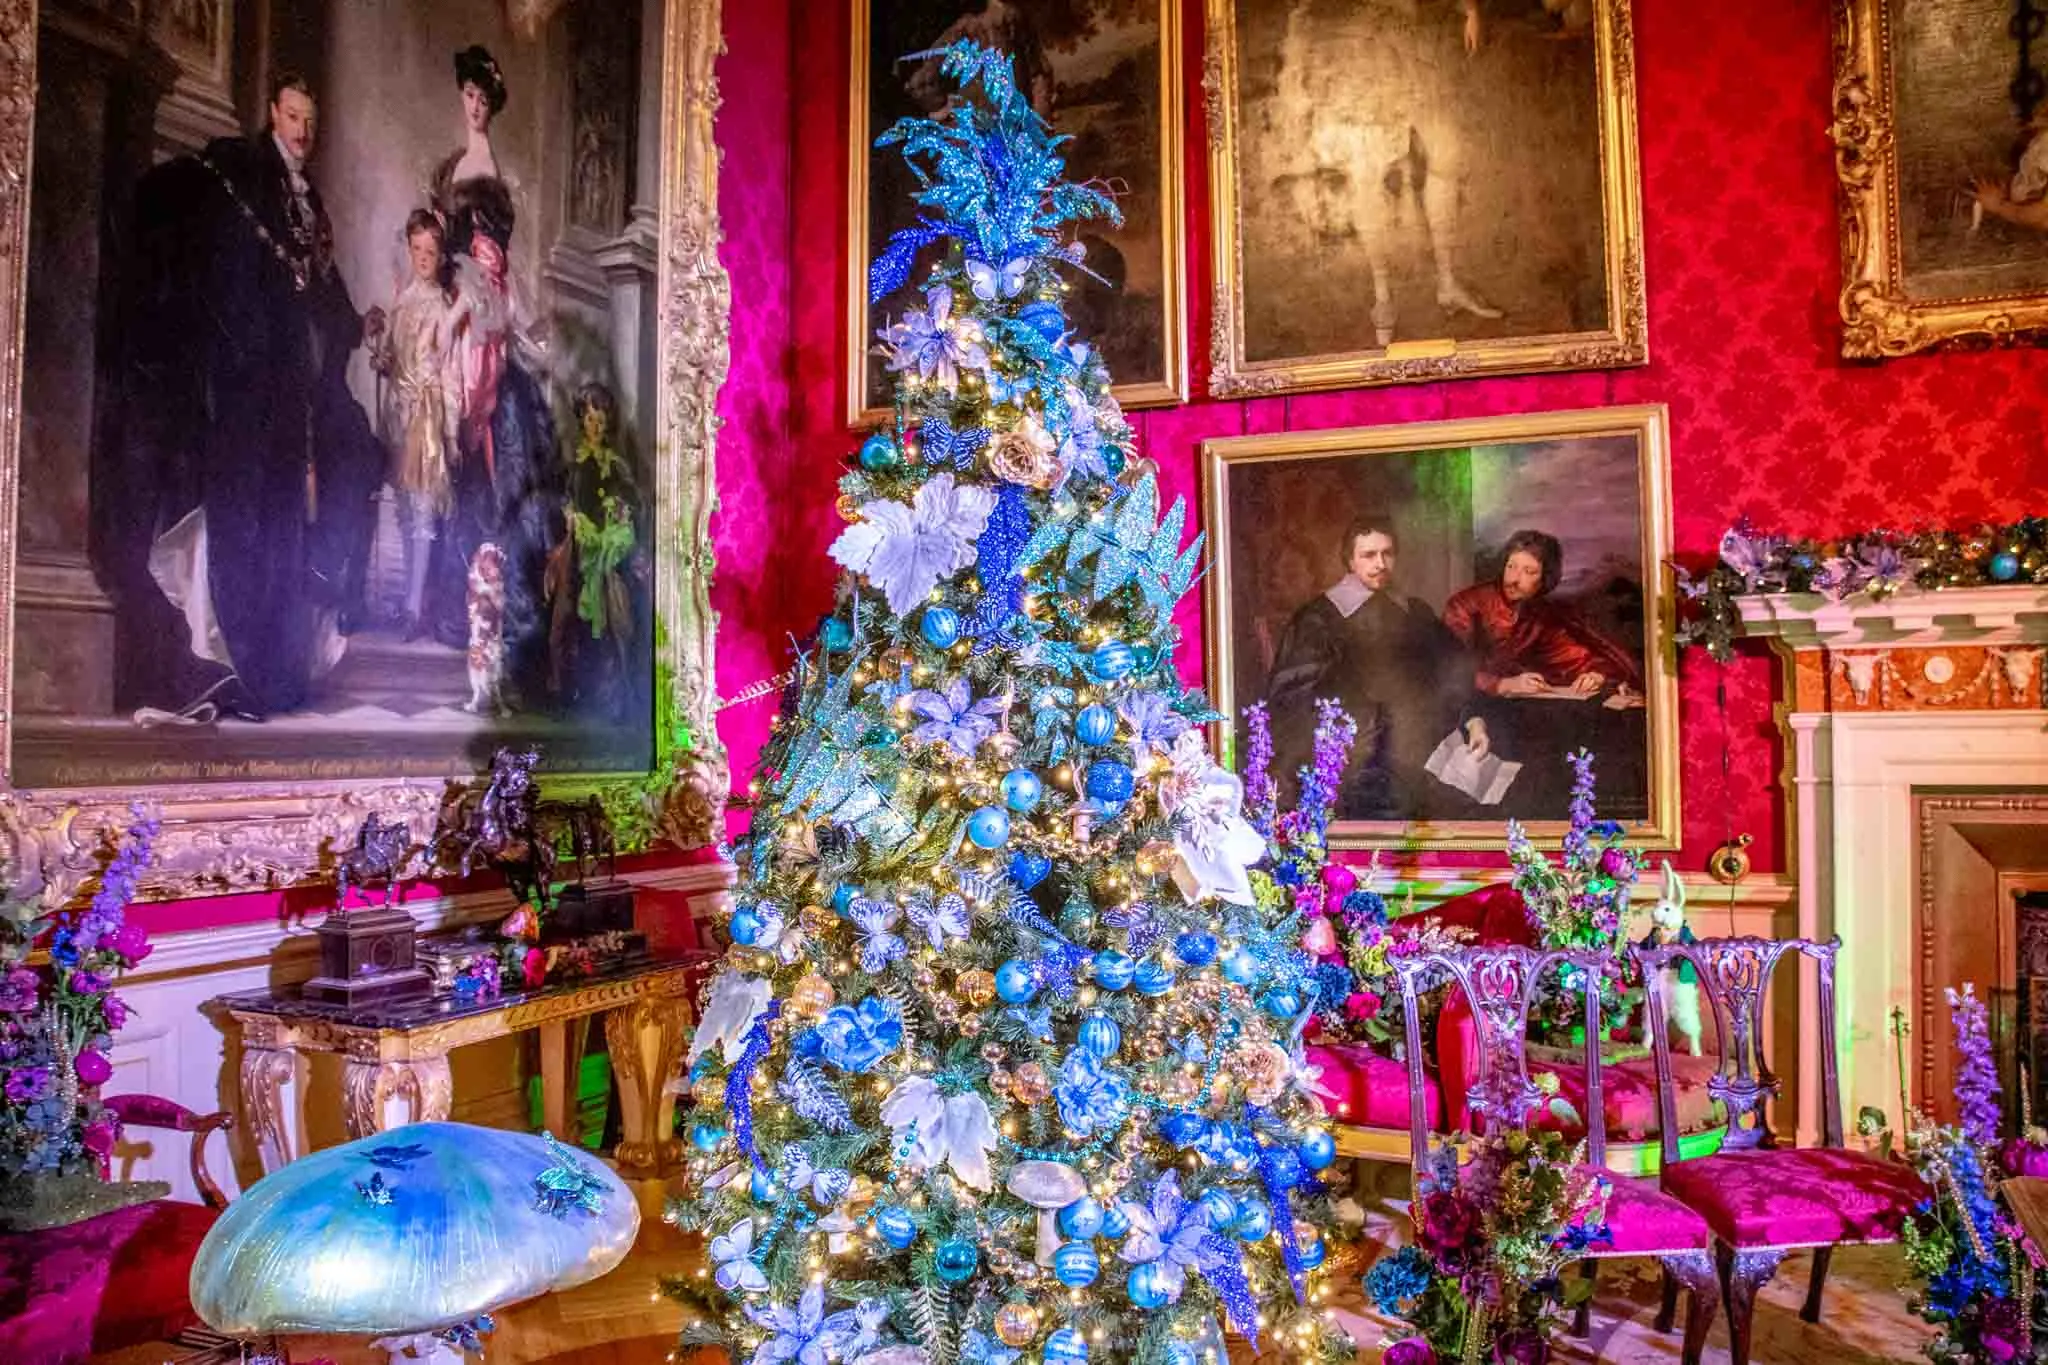 Decorated Christmas tree in a room filled with portraits